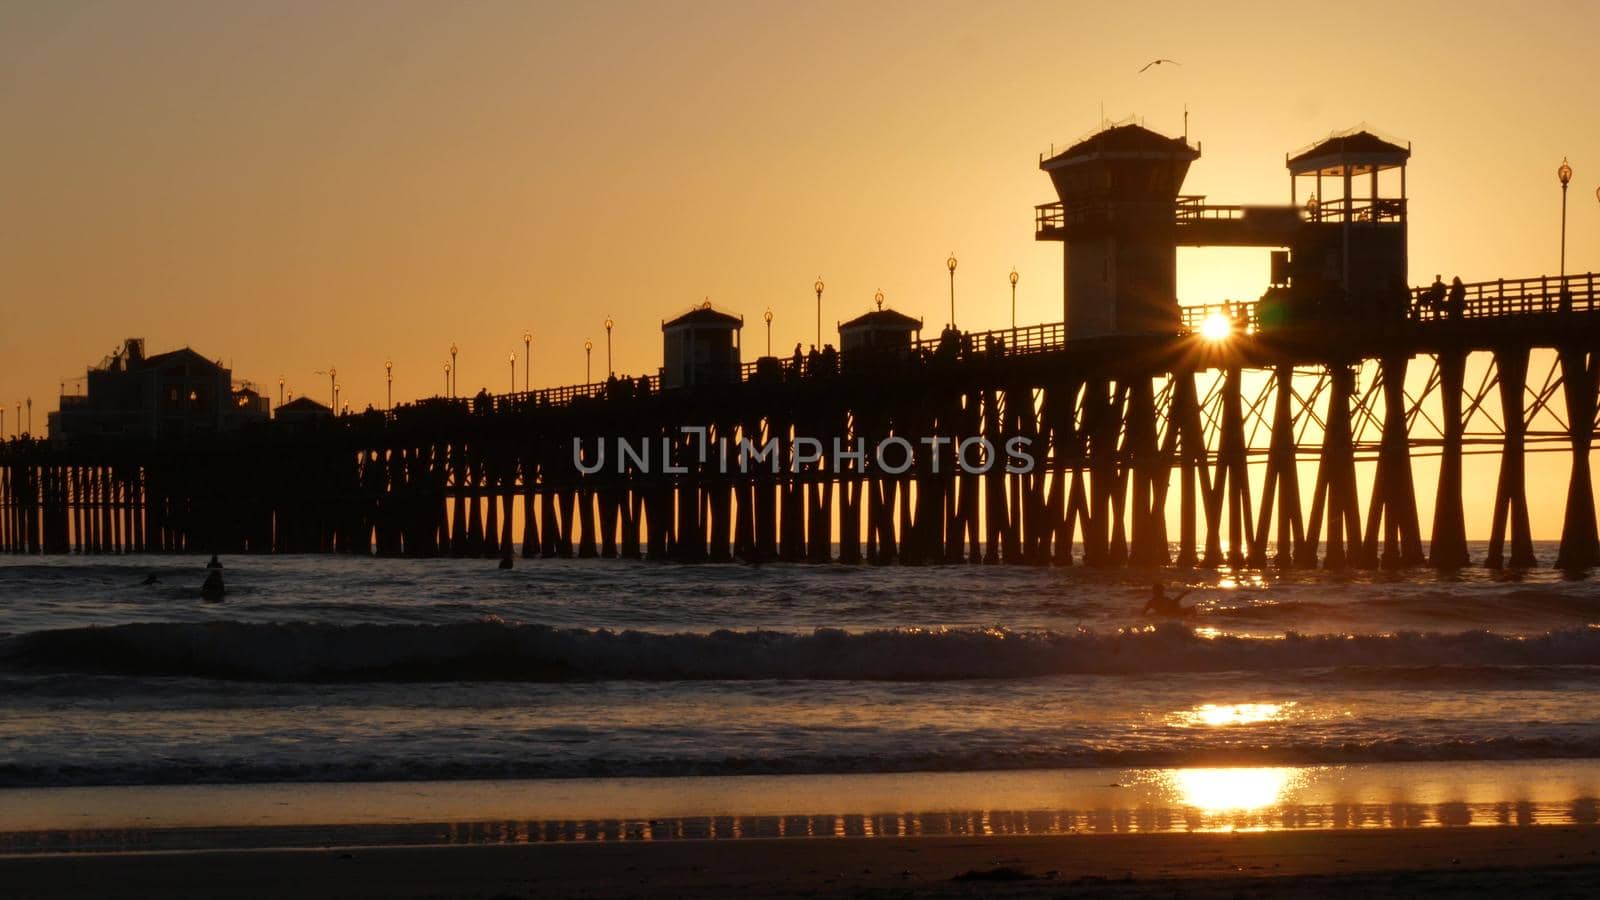 Pier silhouette at sunset, California USA, Oceanside. Surfing resort, ocean tropical beach. Surfer waiting for wave. by DogoraSun